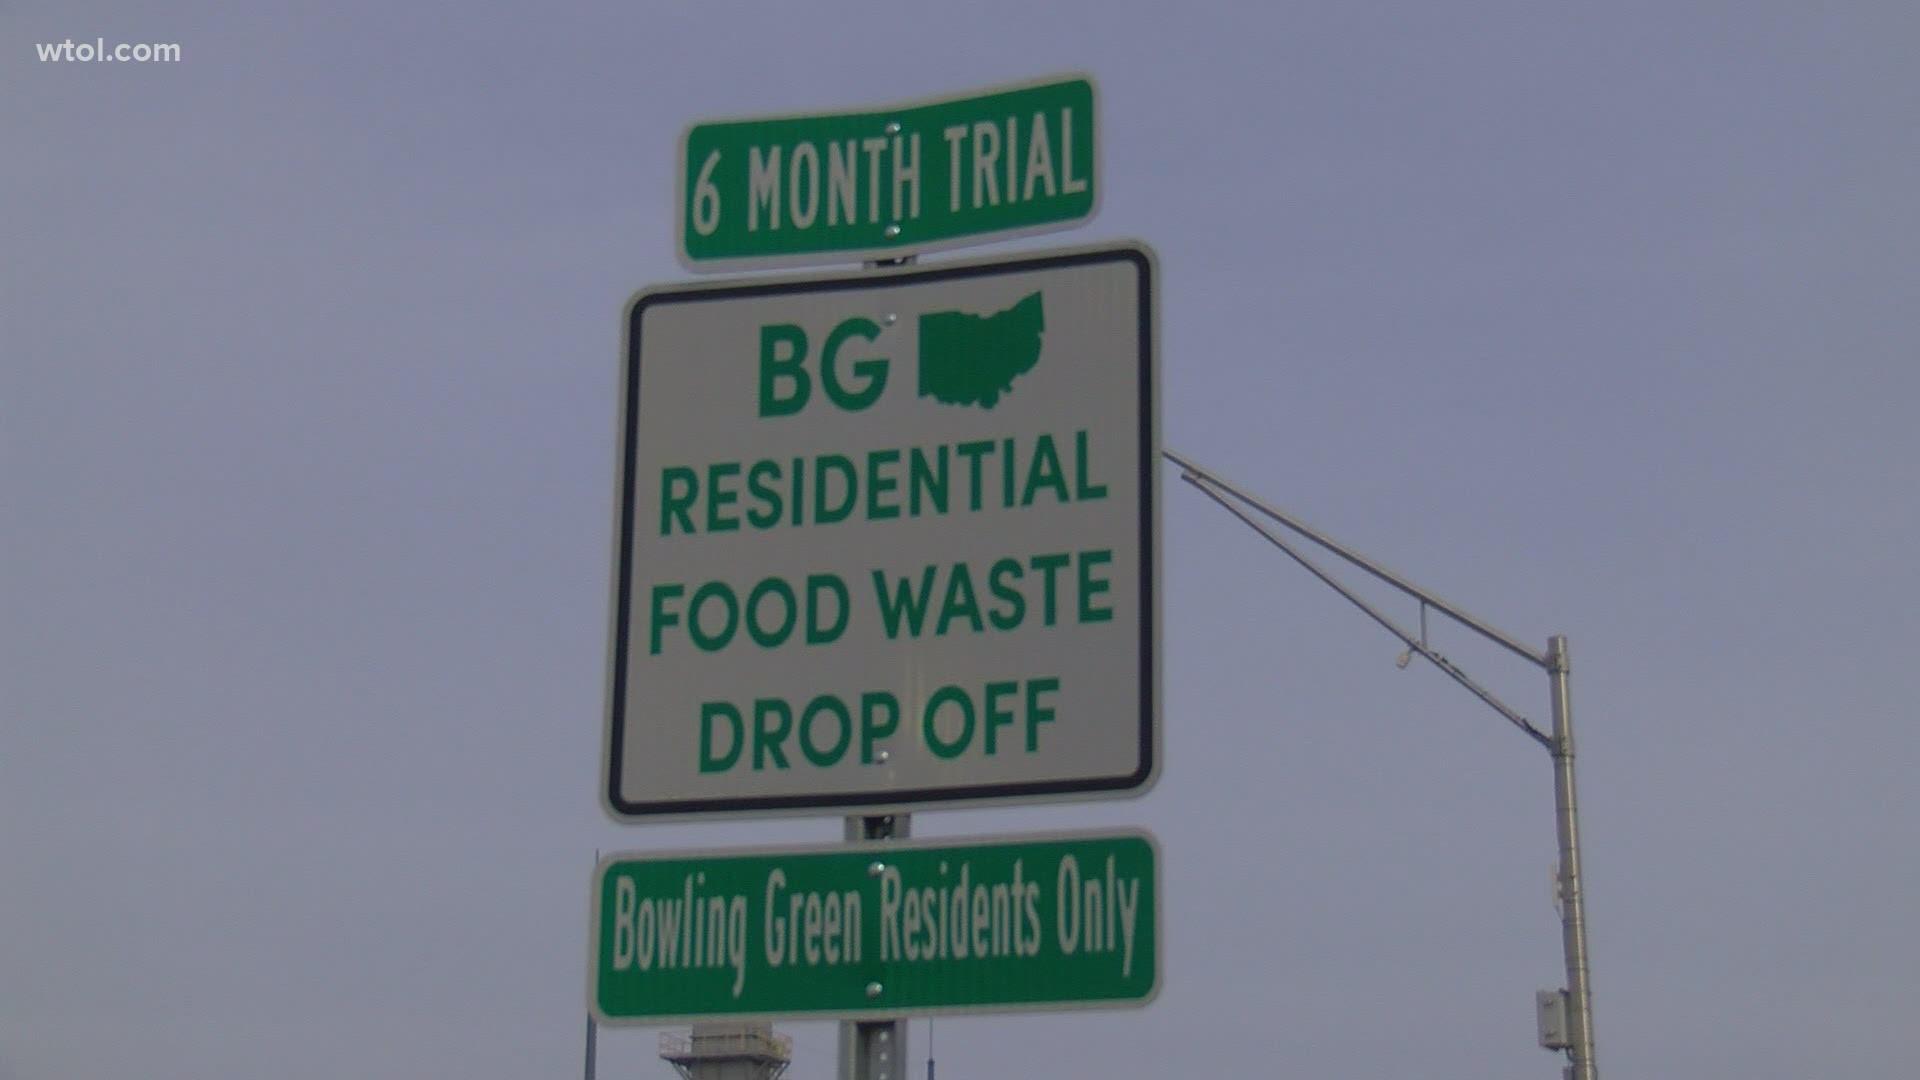 Bowling Green is teaming up with GoZERO, who will take the waste to their facilities and turn it into a compost mixture.